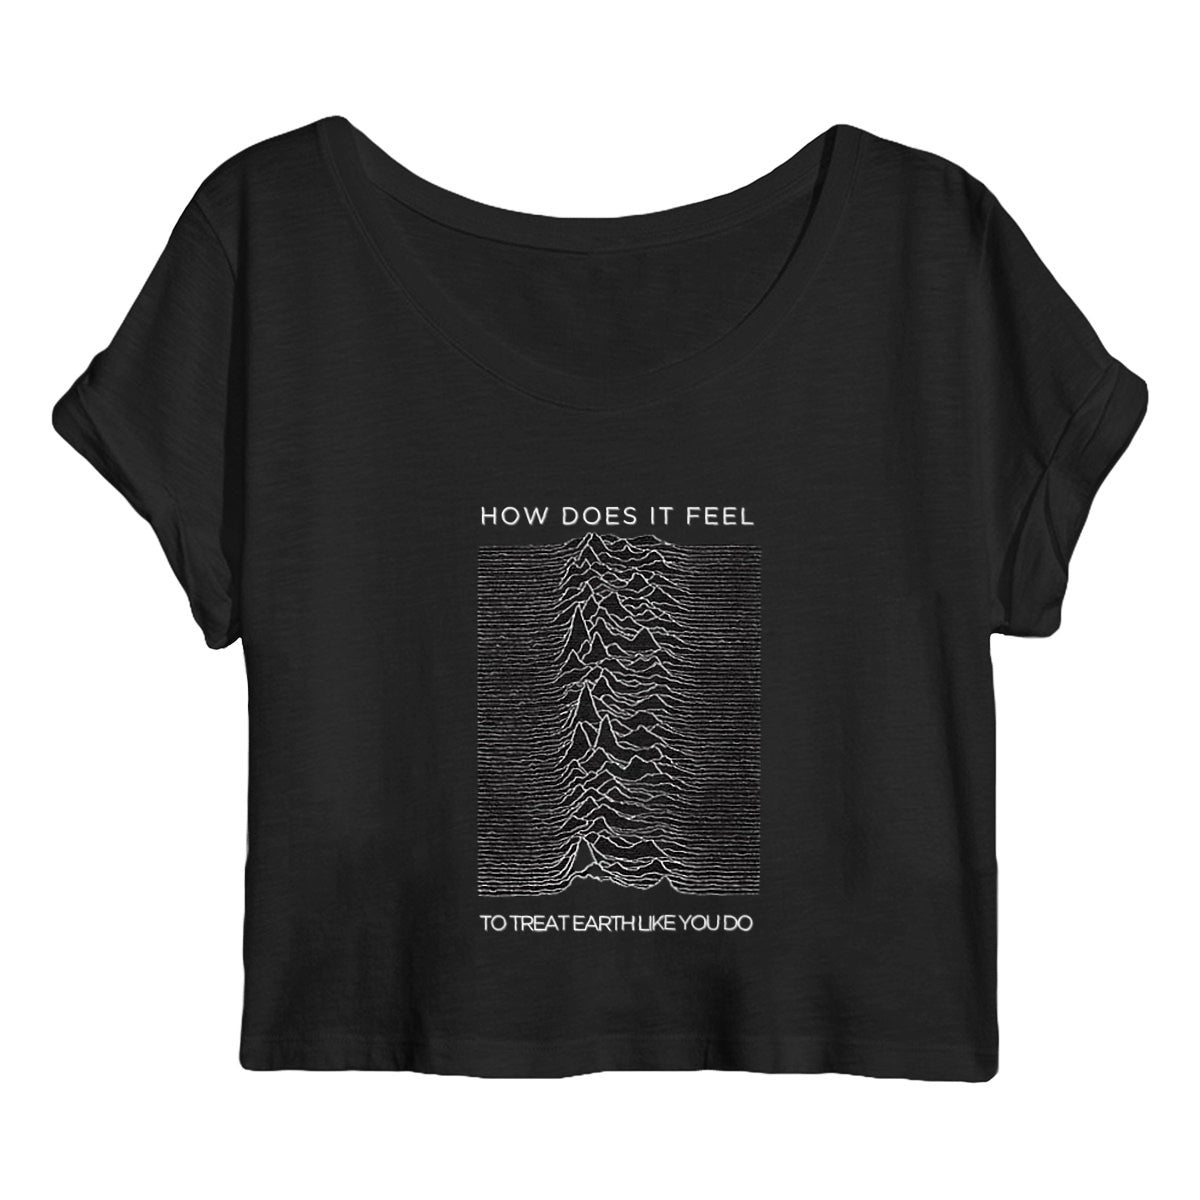 Joy Division Tshirt, Joy Division Album Art, How does it feel to treat me like you do tshirt, t shirts made to order, made-to-order clothing, Holding Court Inc, Courtney Barriger, Organic cotton clothes for women, Organic Cotton Clothing for Women, Organic Cotton Tank Tops, Cotton Organic T Shirts, Organic Cotton T Shirt, Band Tees, Vintage Tees, Rolling Stones Bomber Jacket, Stoned Girls, She's a rainbow, Environmental Slogan Tshirt Environmental Slogan Tee